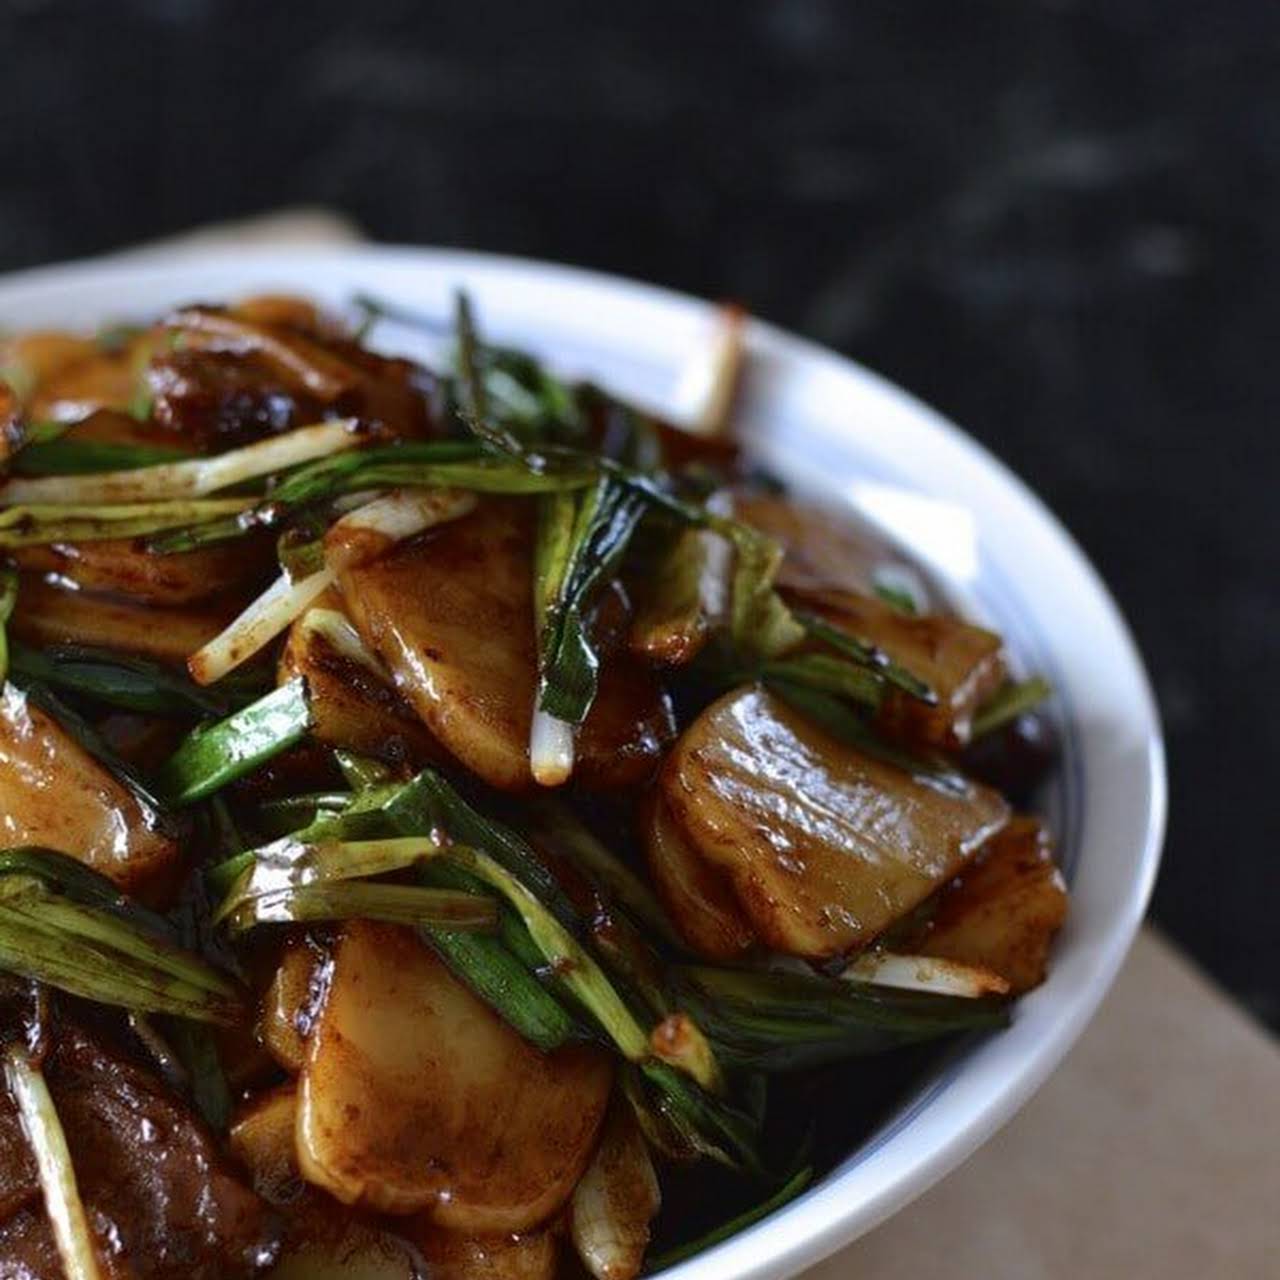 15 Chinese New Year Foods to Serve for Lunar New Year – PureWow